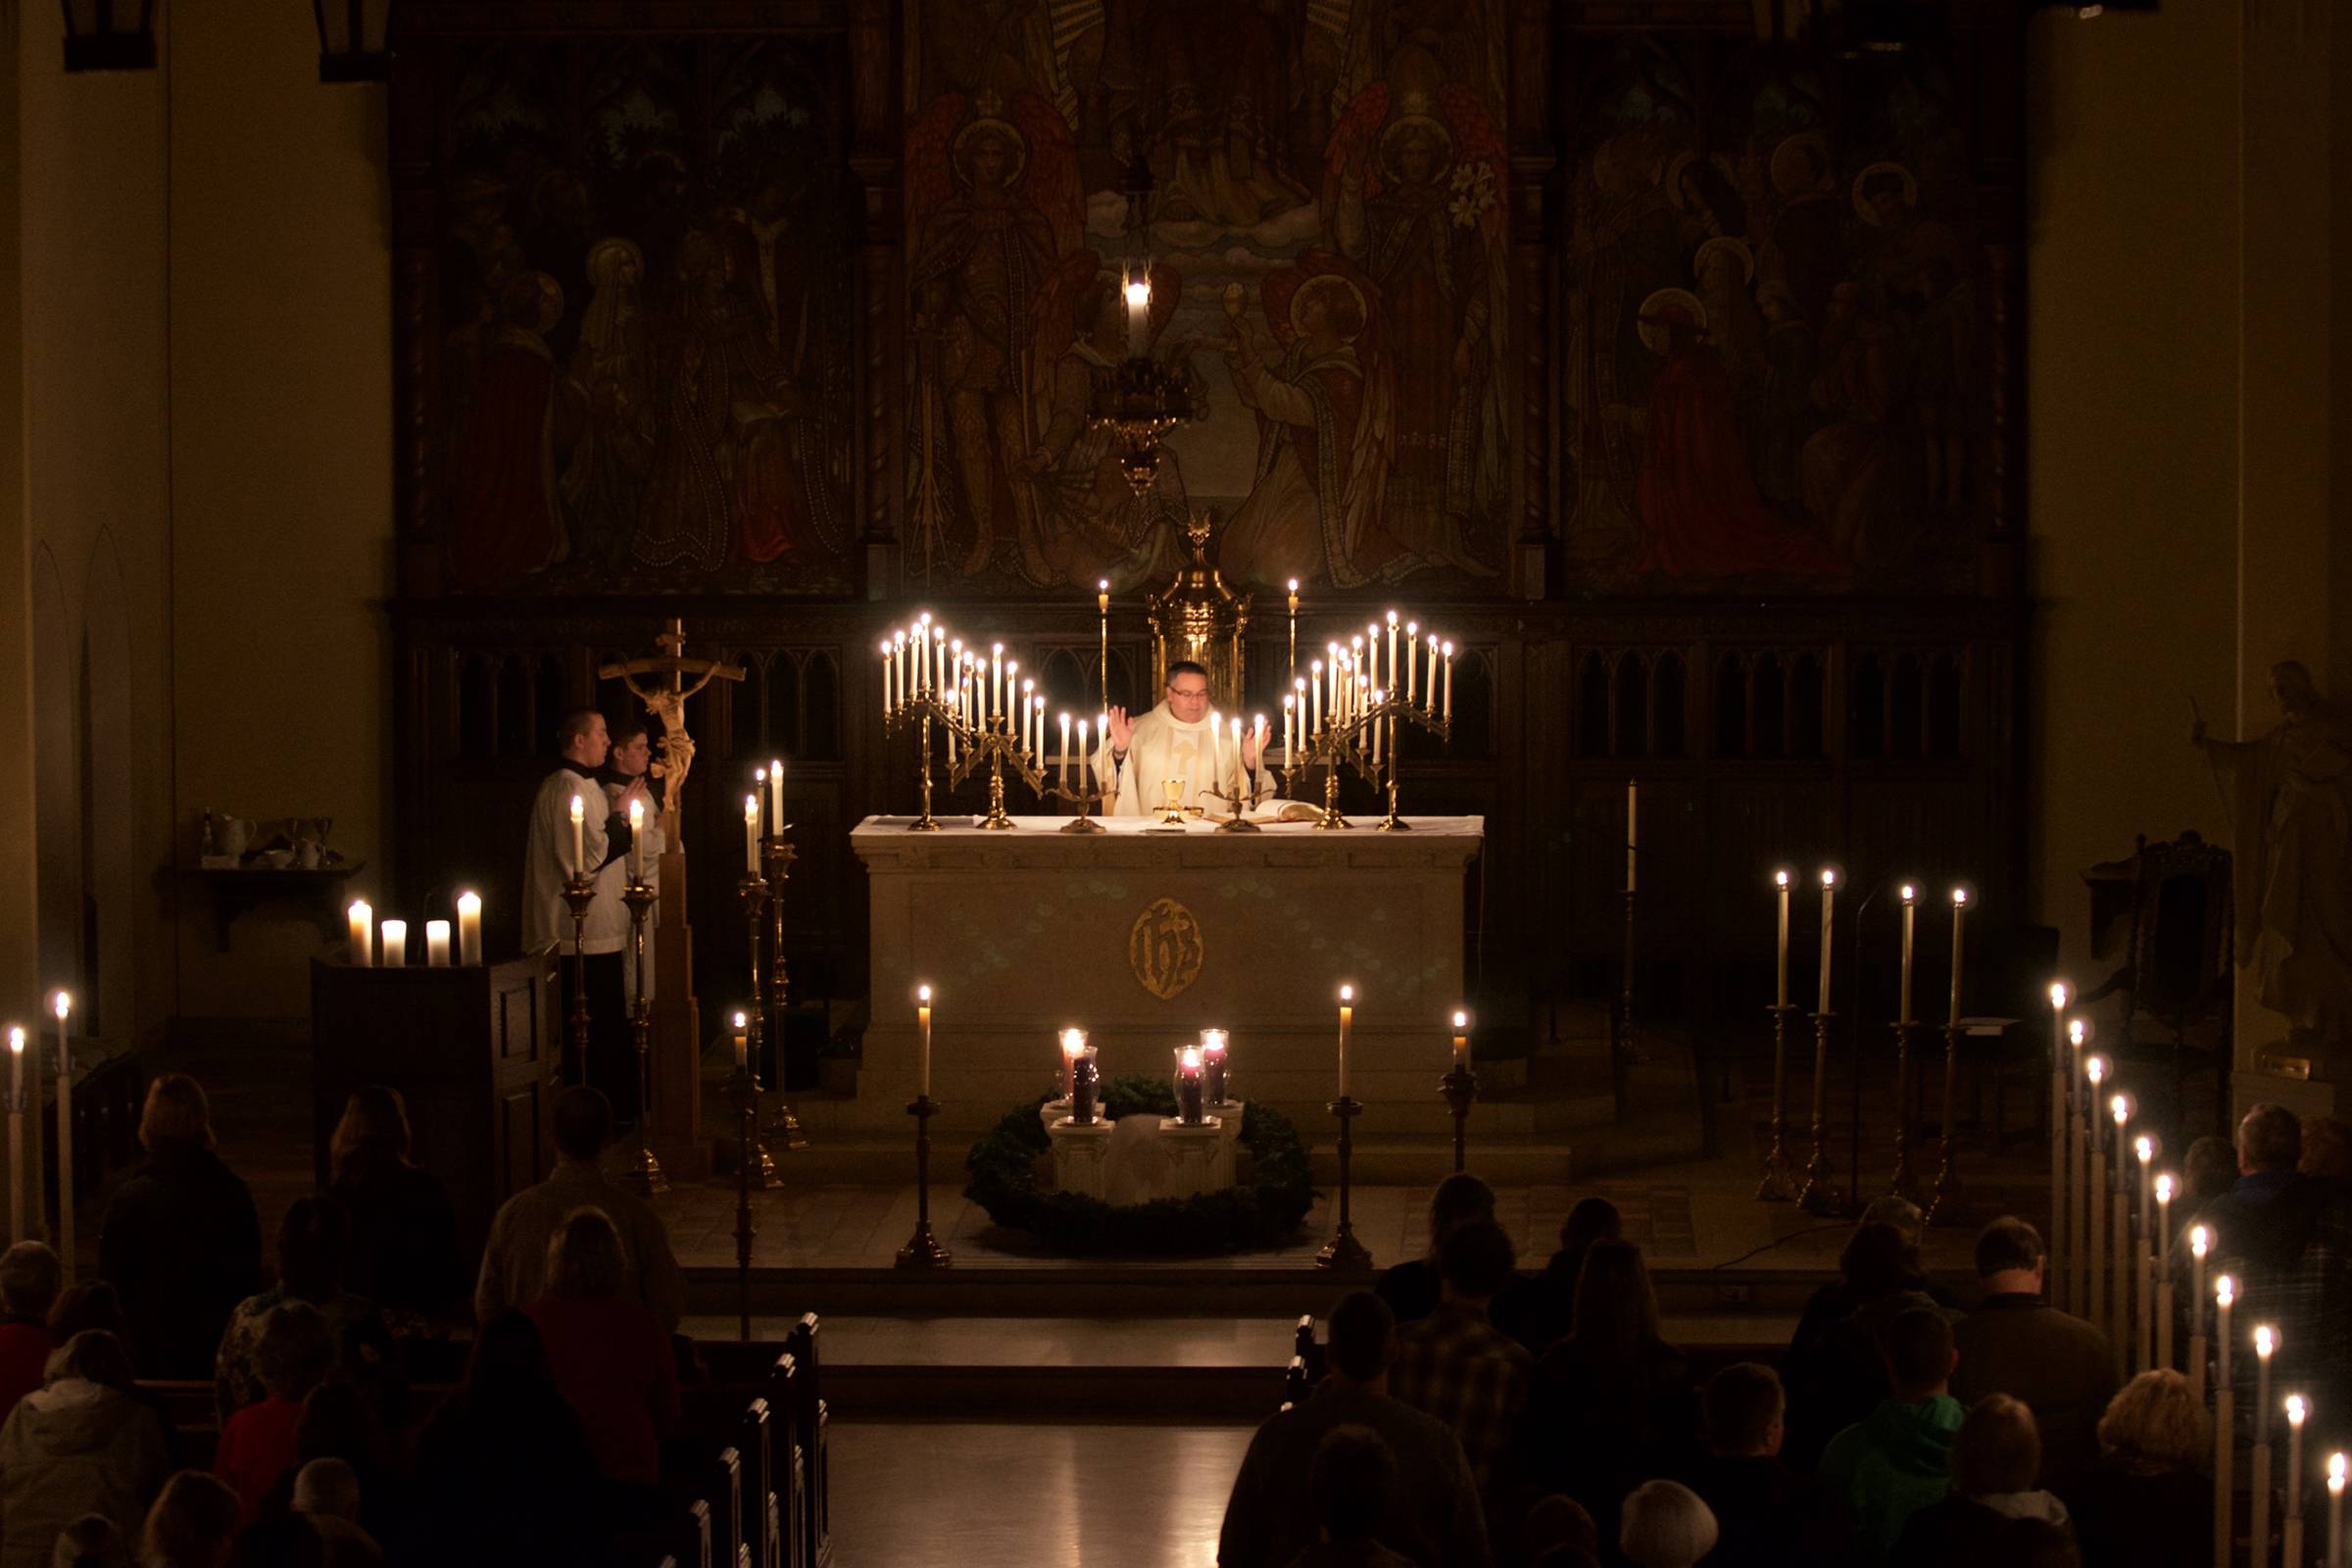 The beauty of a Advent tradition the "Rorate Mass" Philip